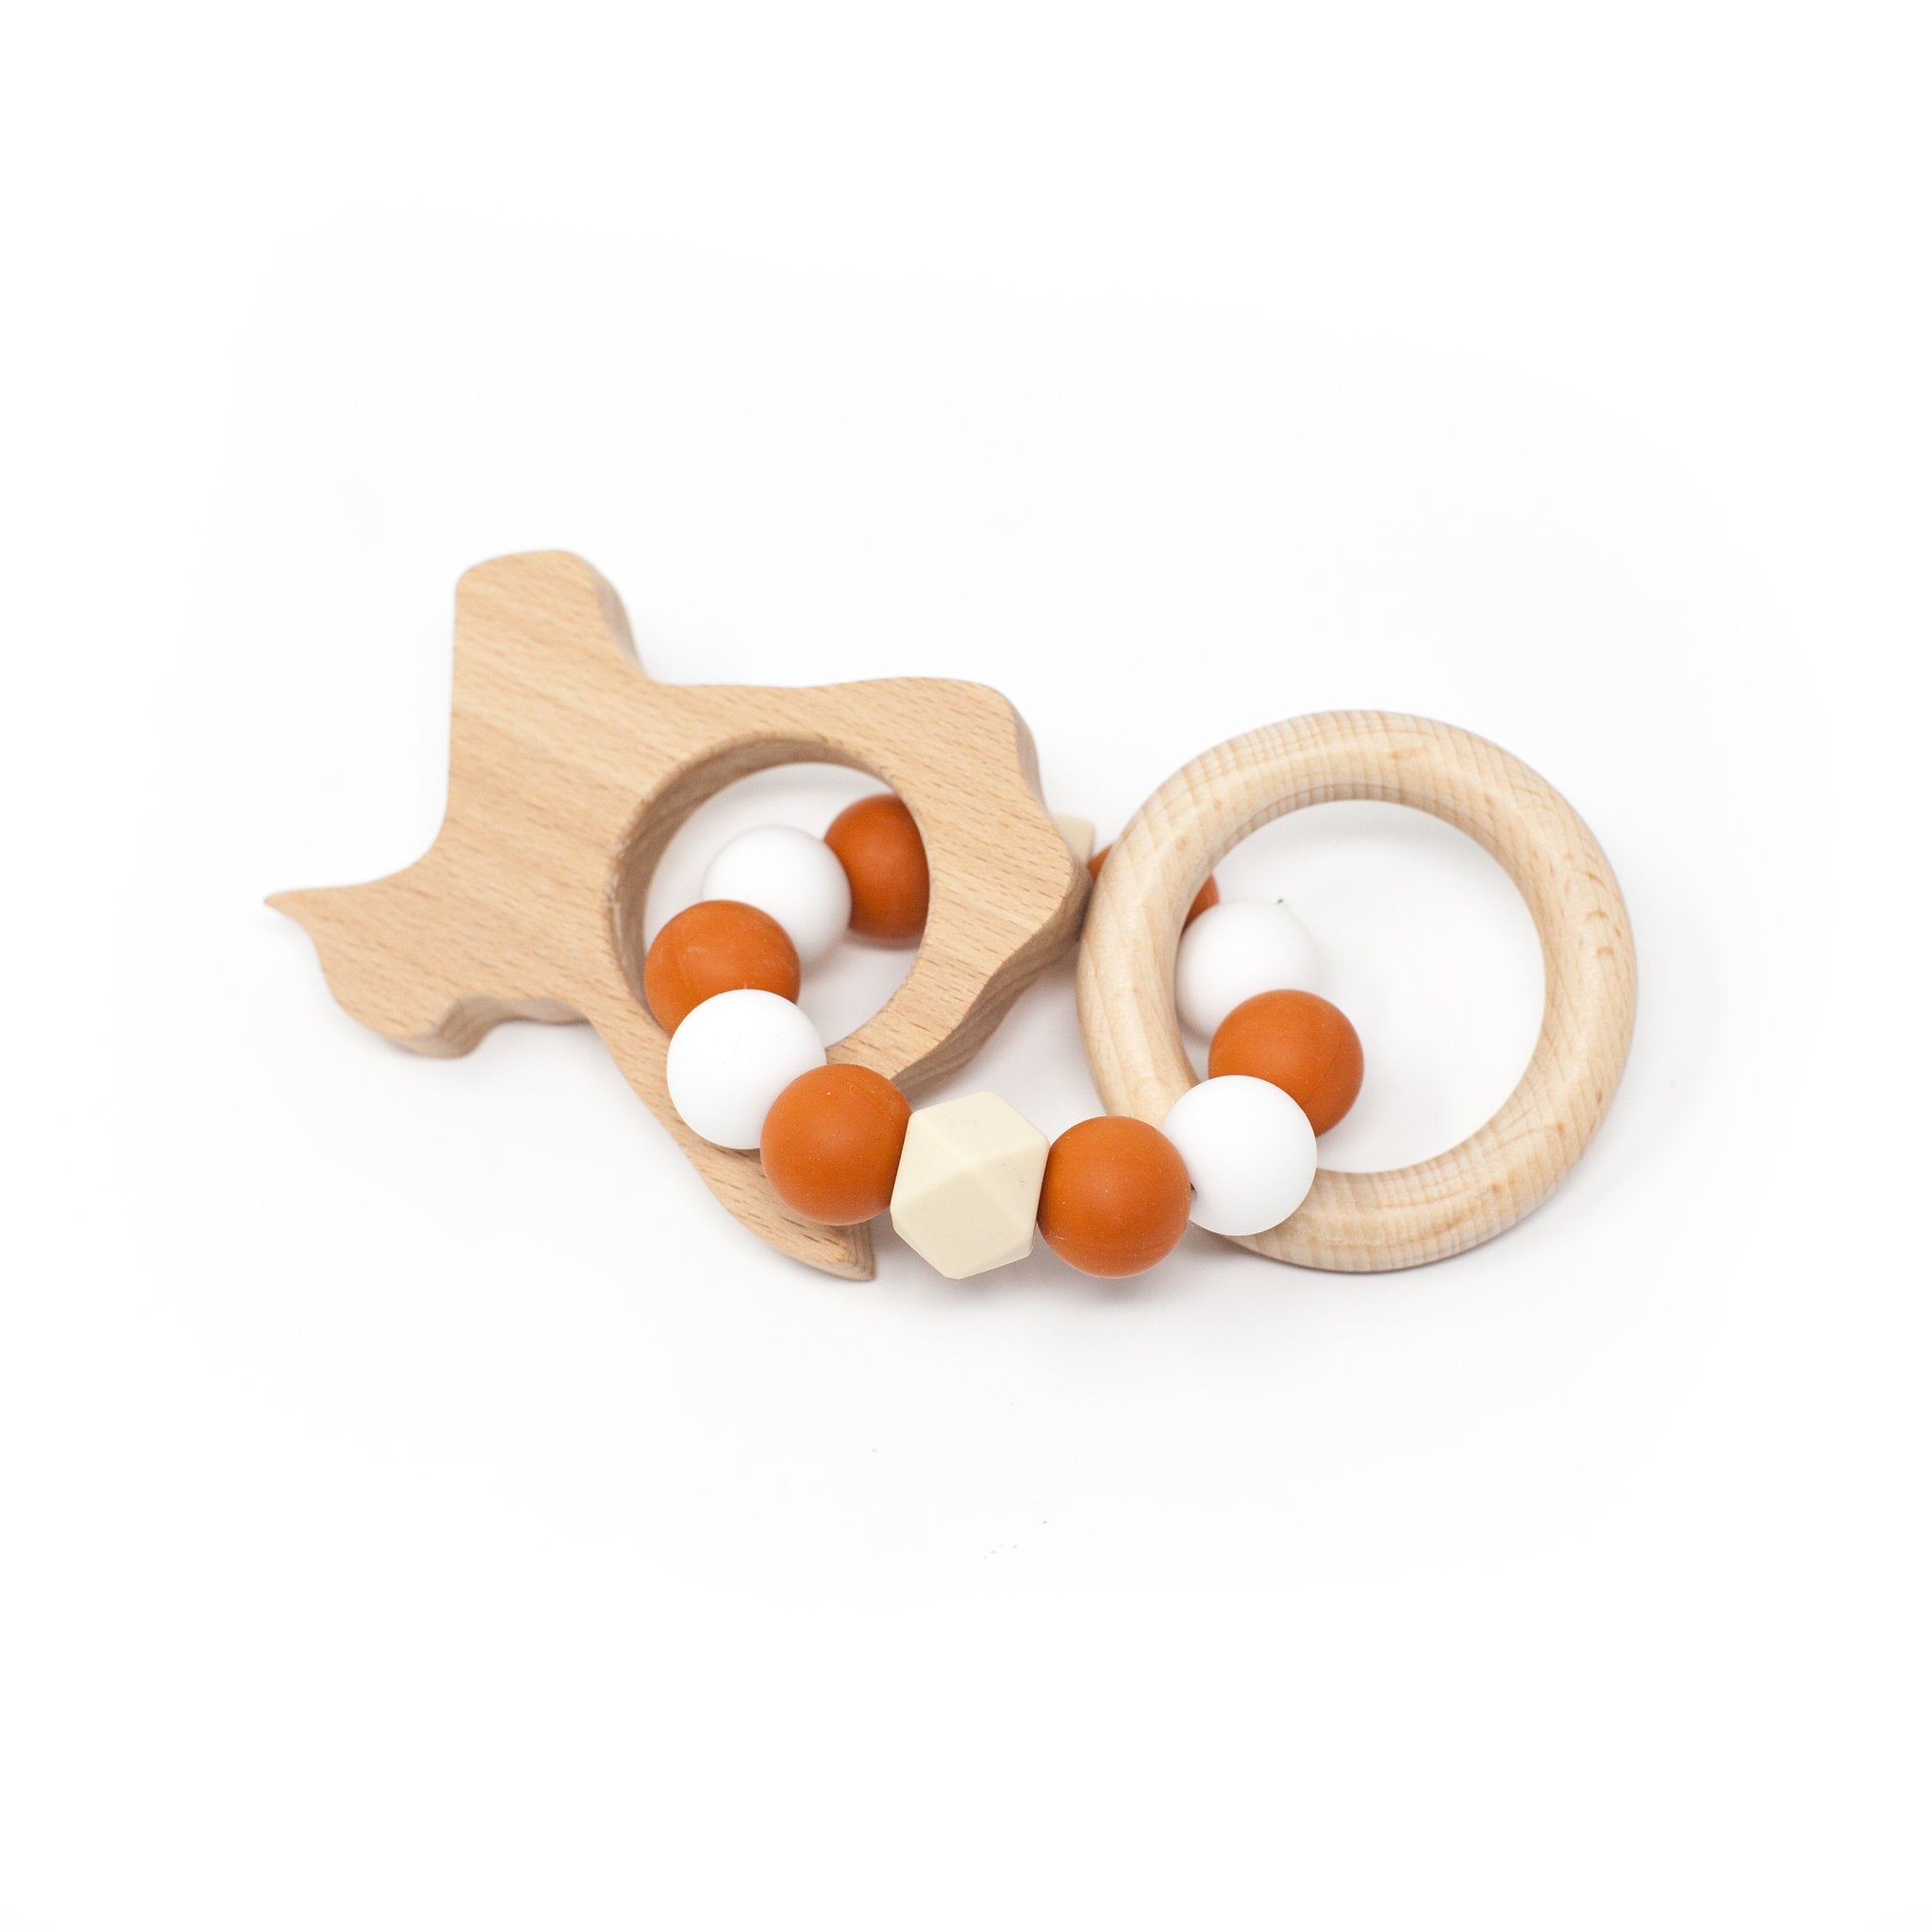 College Inspired Texas Rattle - Beech Wood & Food Grade Silicone